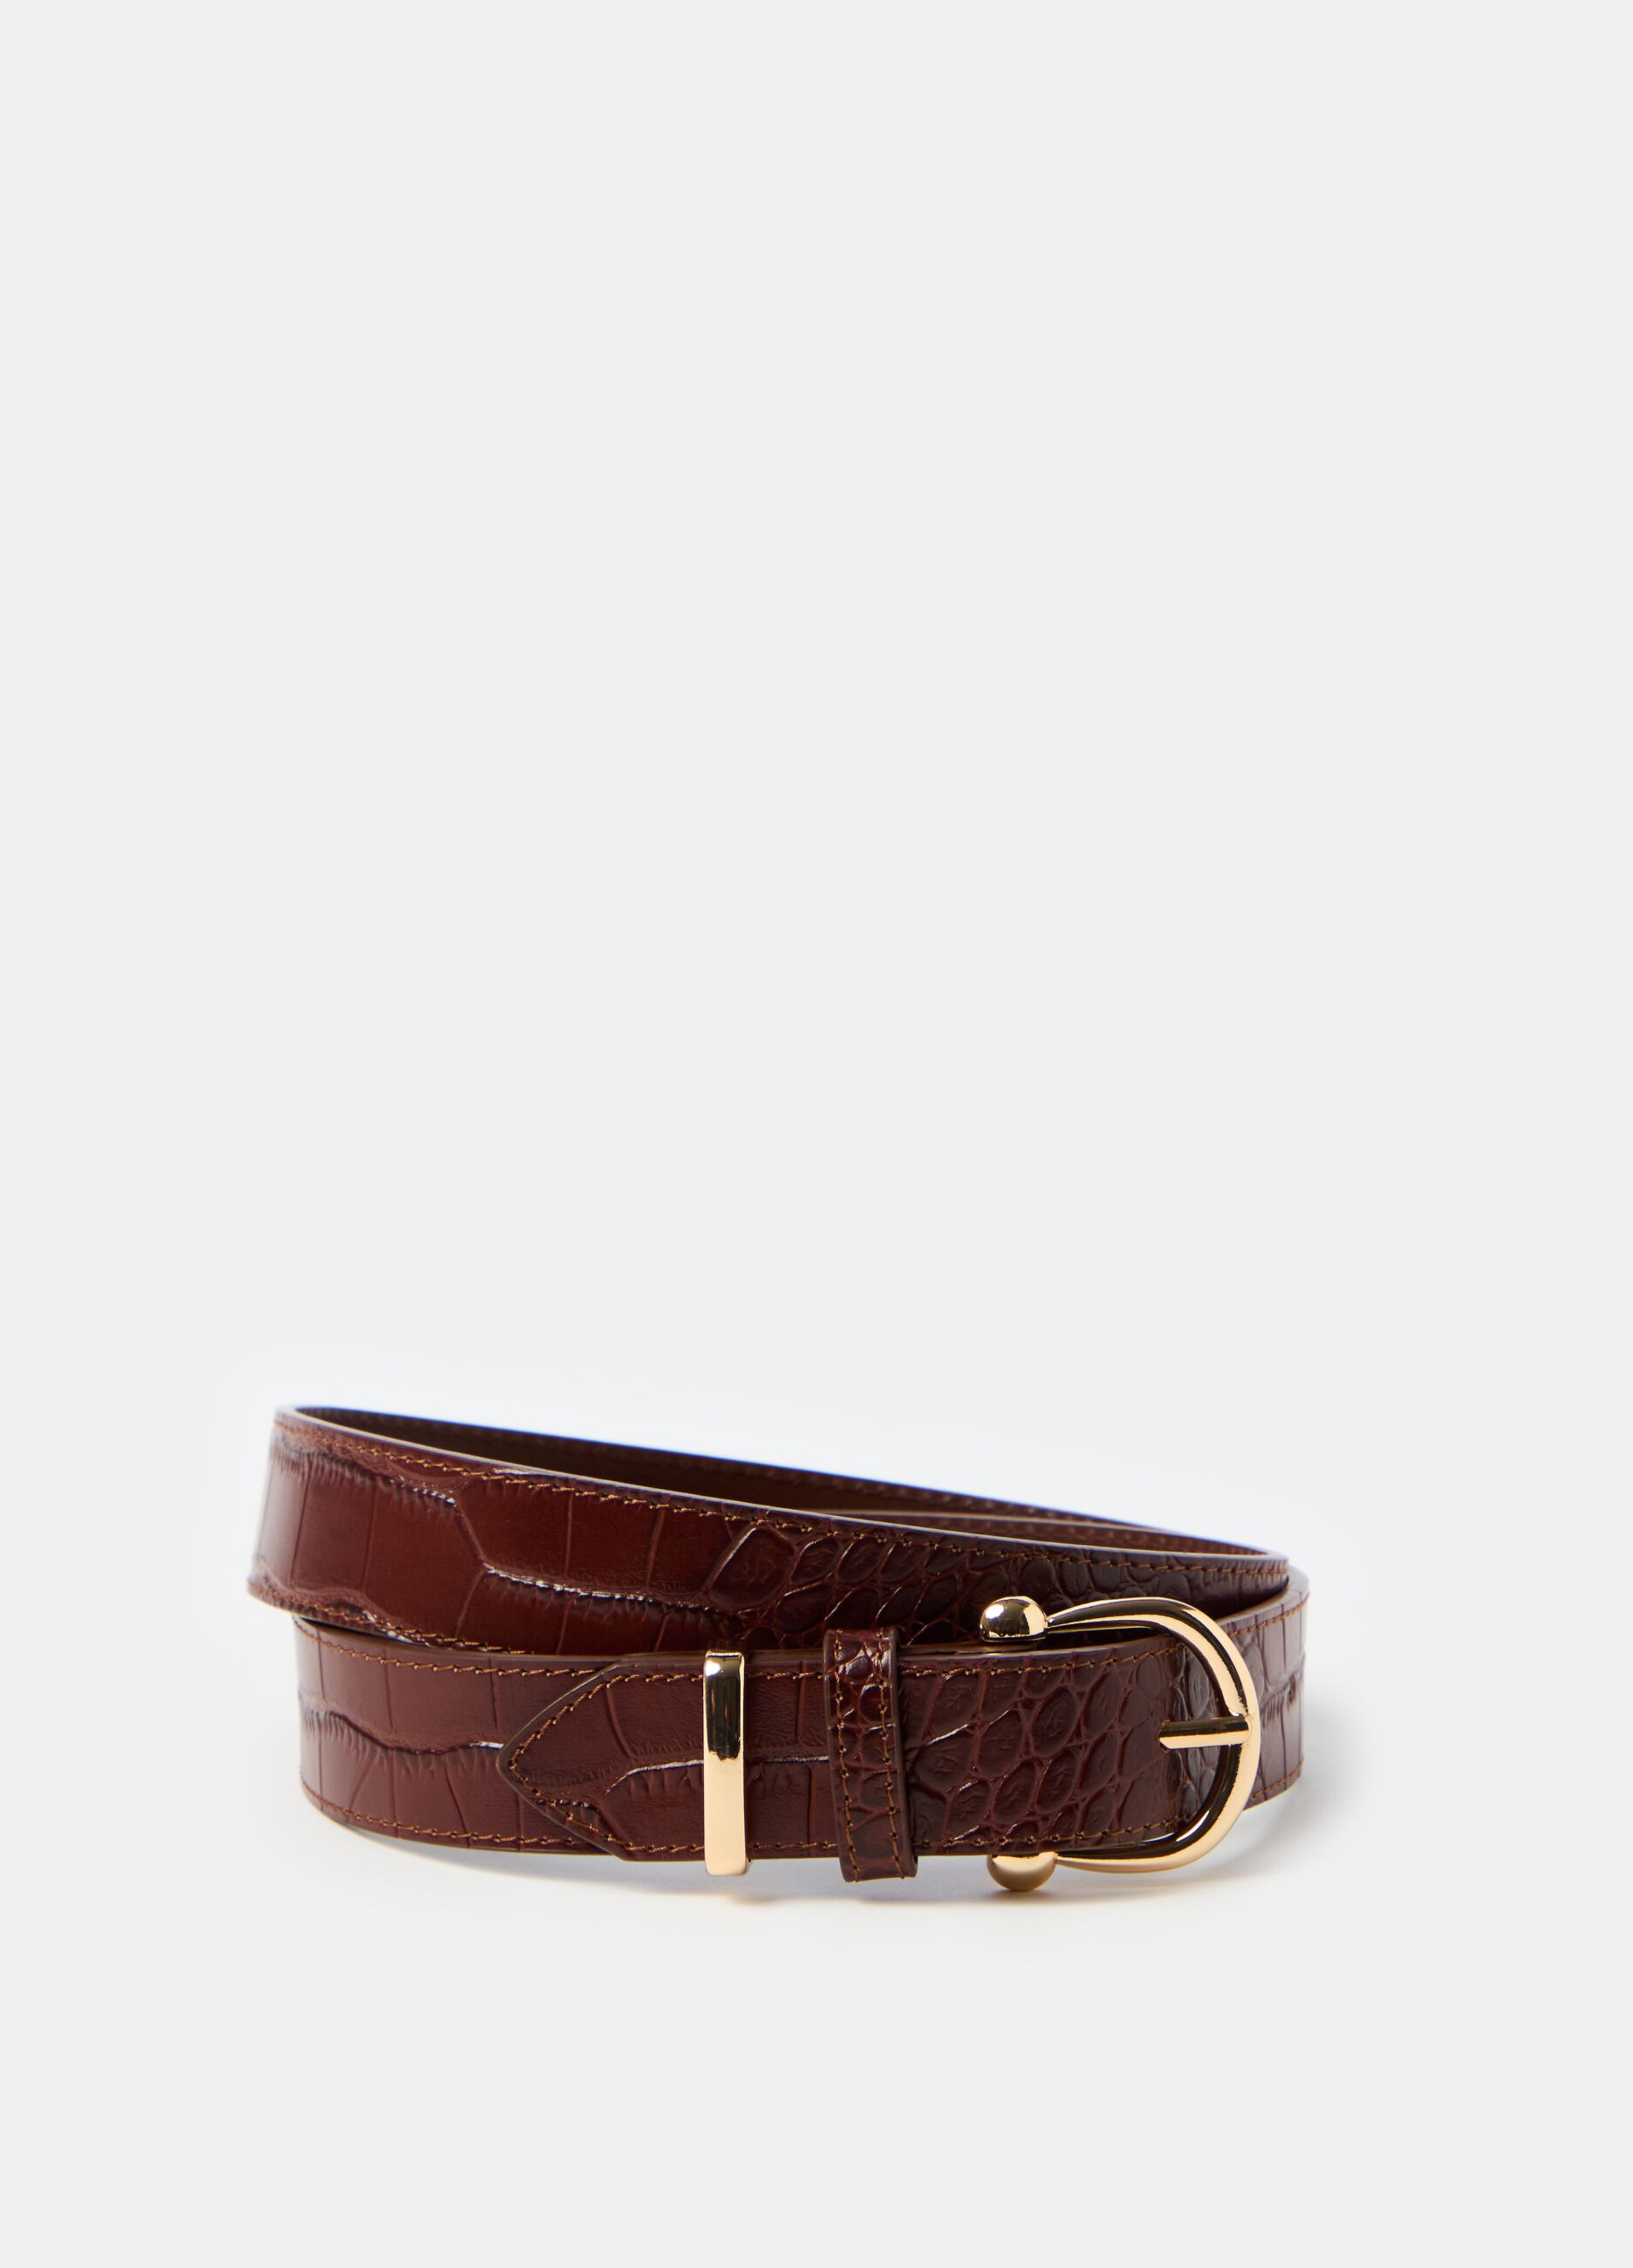 Contemporary belt in textured leather